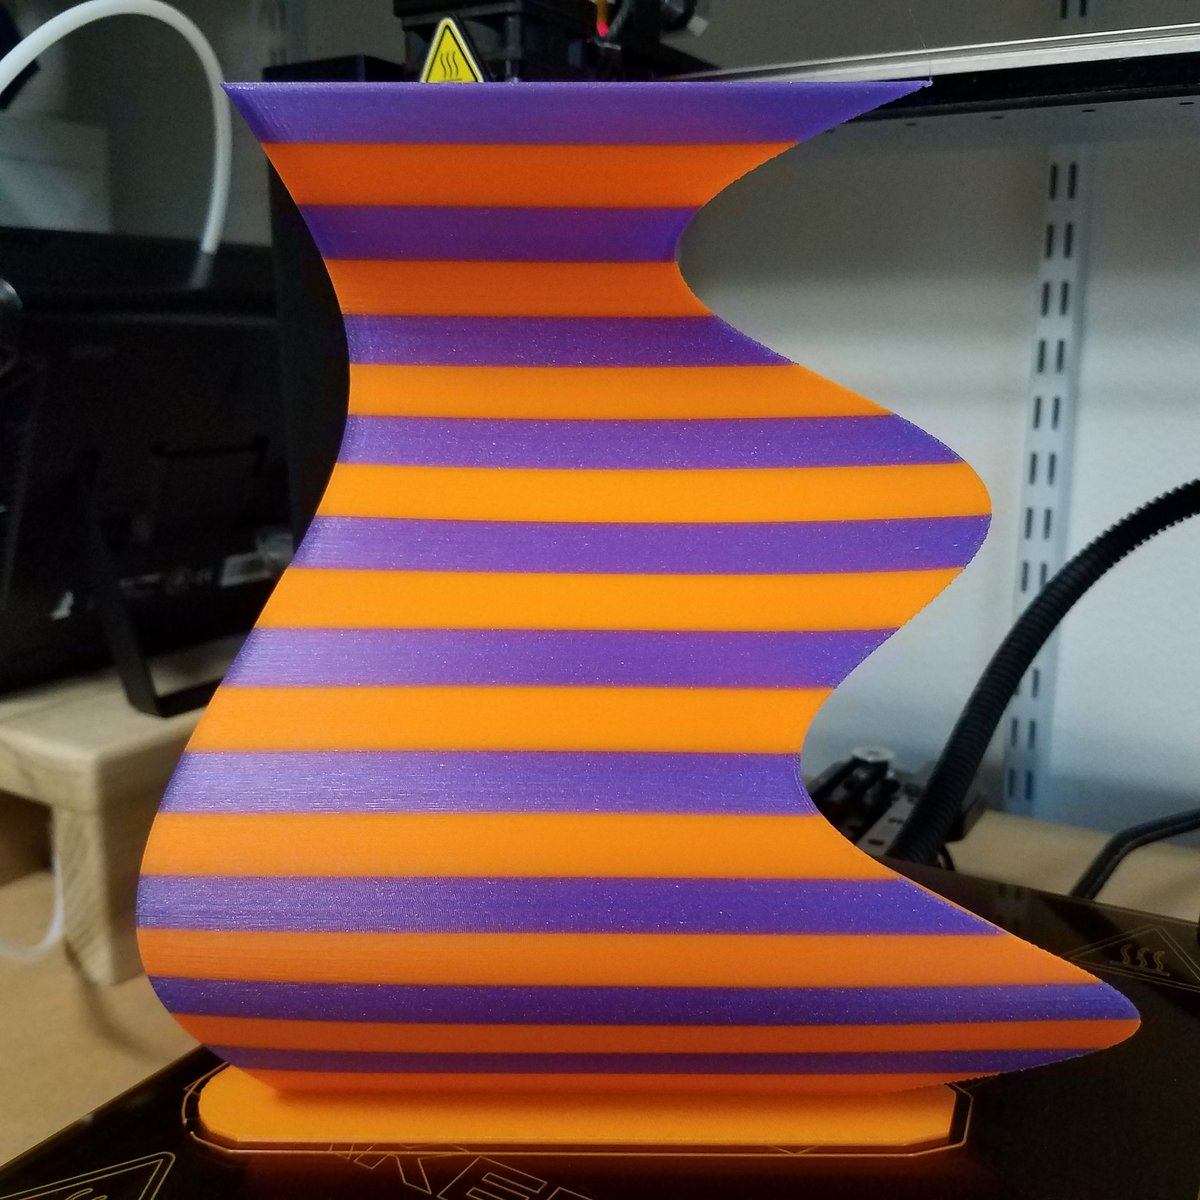 Done! I wasn't sure if I could pull this off without supports. I debated several different options within my slicer along the way. Should have tagged  @Simplify3D too!It's hollow. Hopefully it won't fall apart taking it off the bed and raft... #3DPrinting